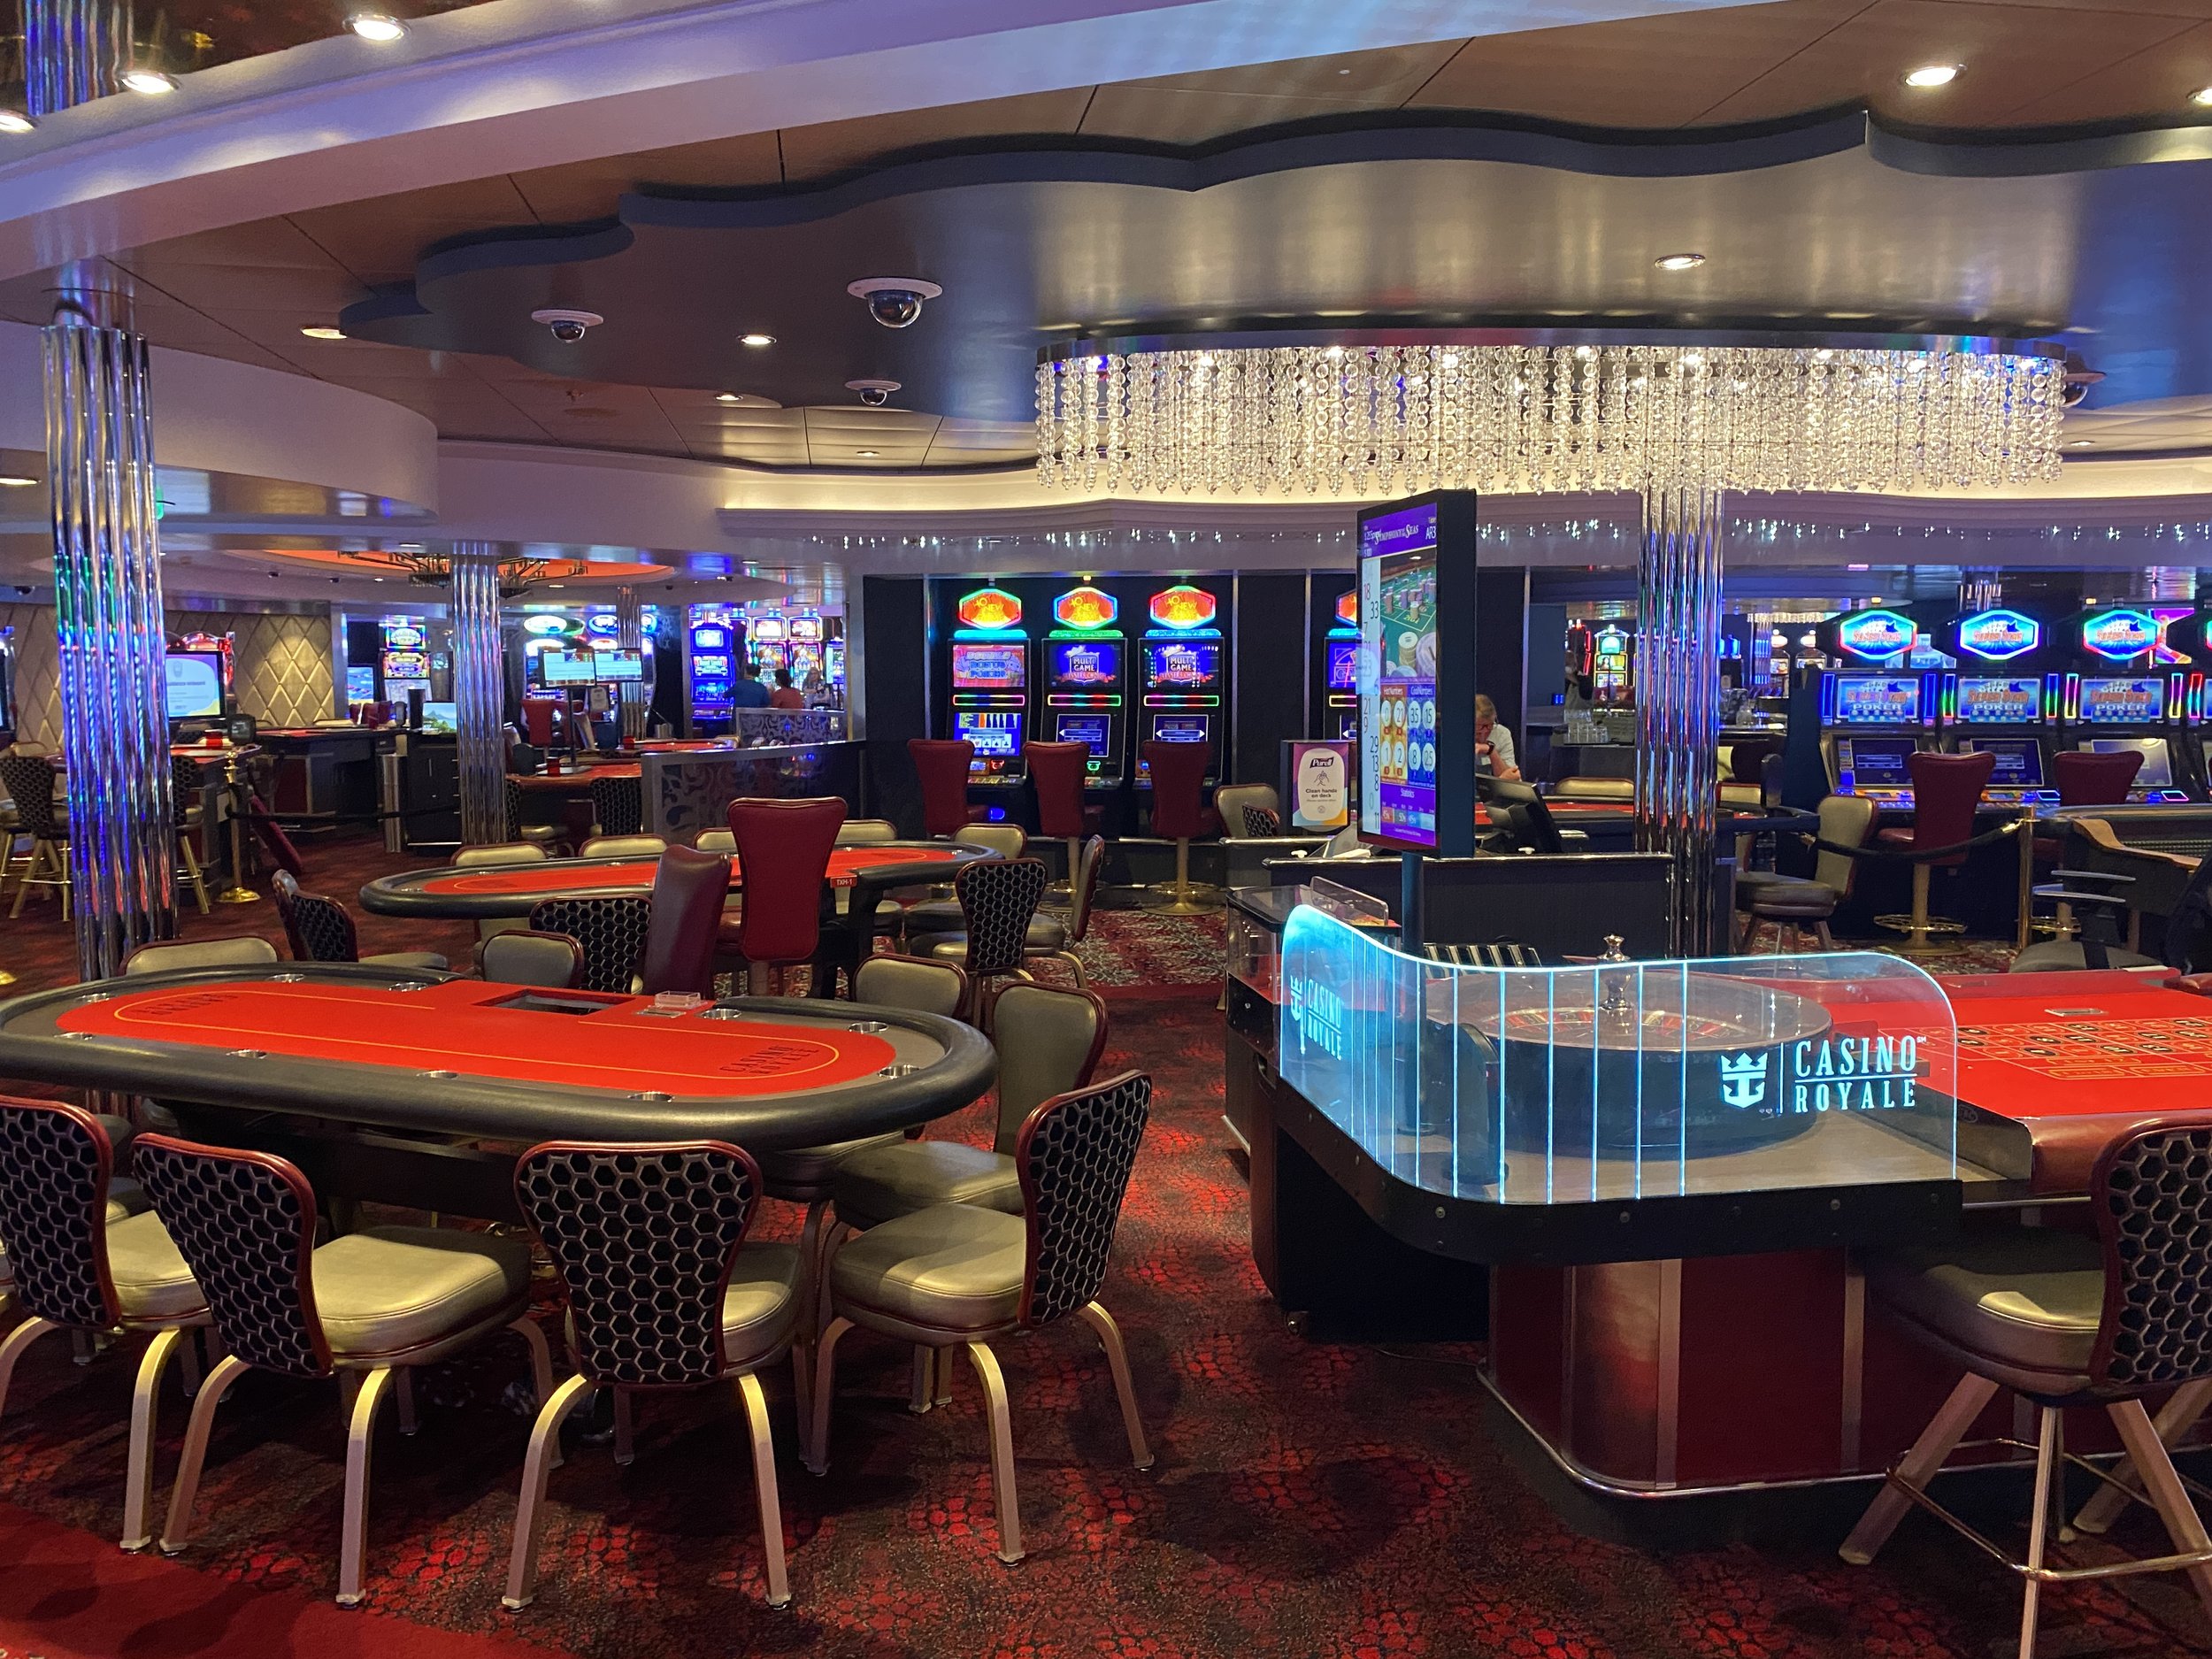  I’m a Disney guy at heart but Las Vegas is my second favorite place to visit. So I had to check out the casino. Here you’ll find table games and slots. Smoking and non-smoking sections are available. 